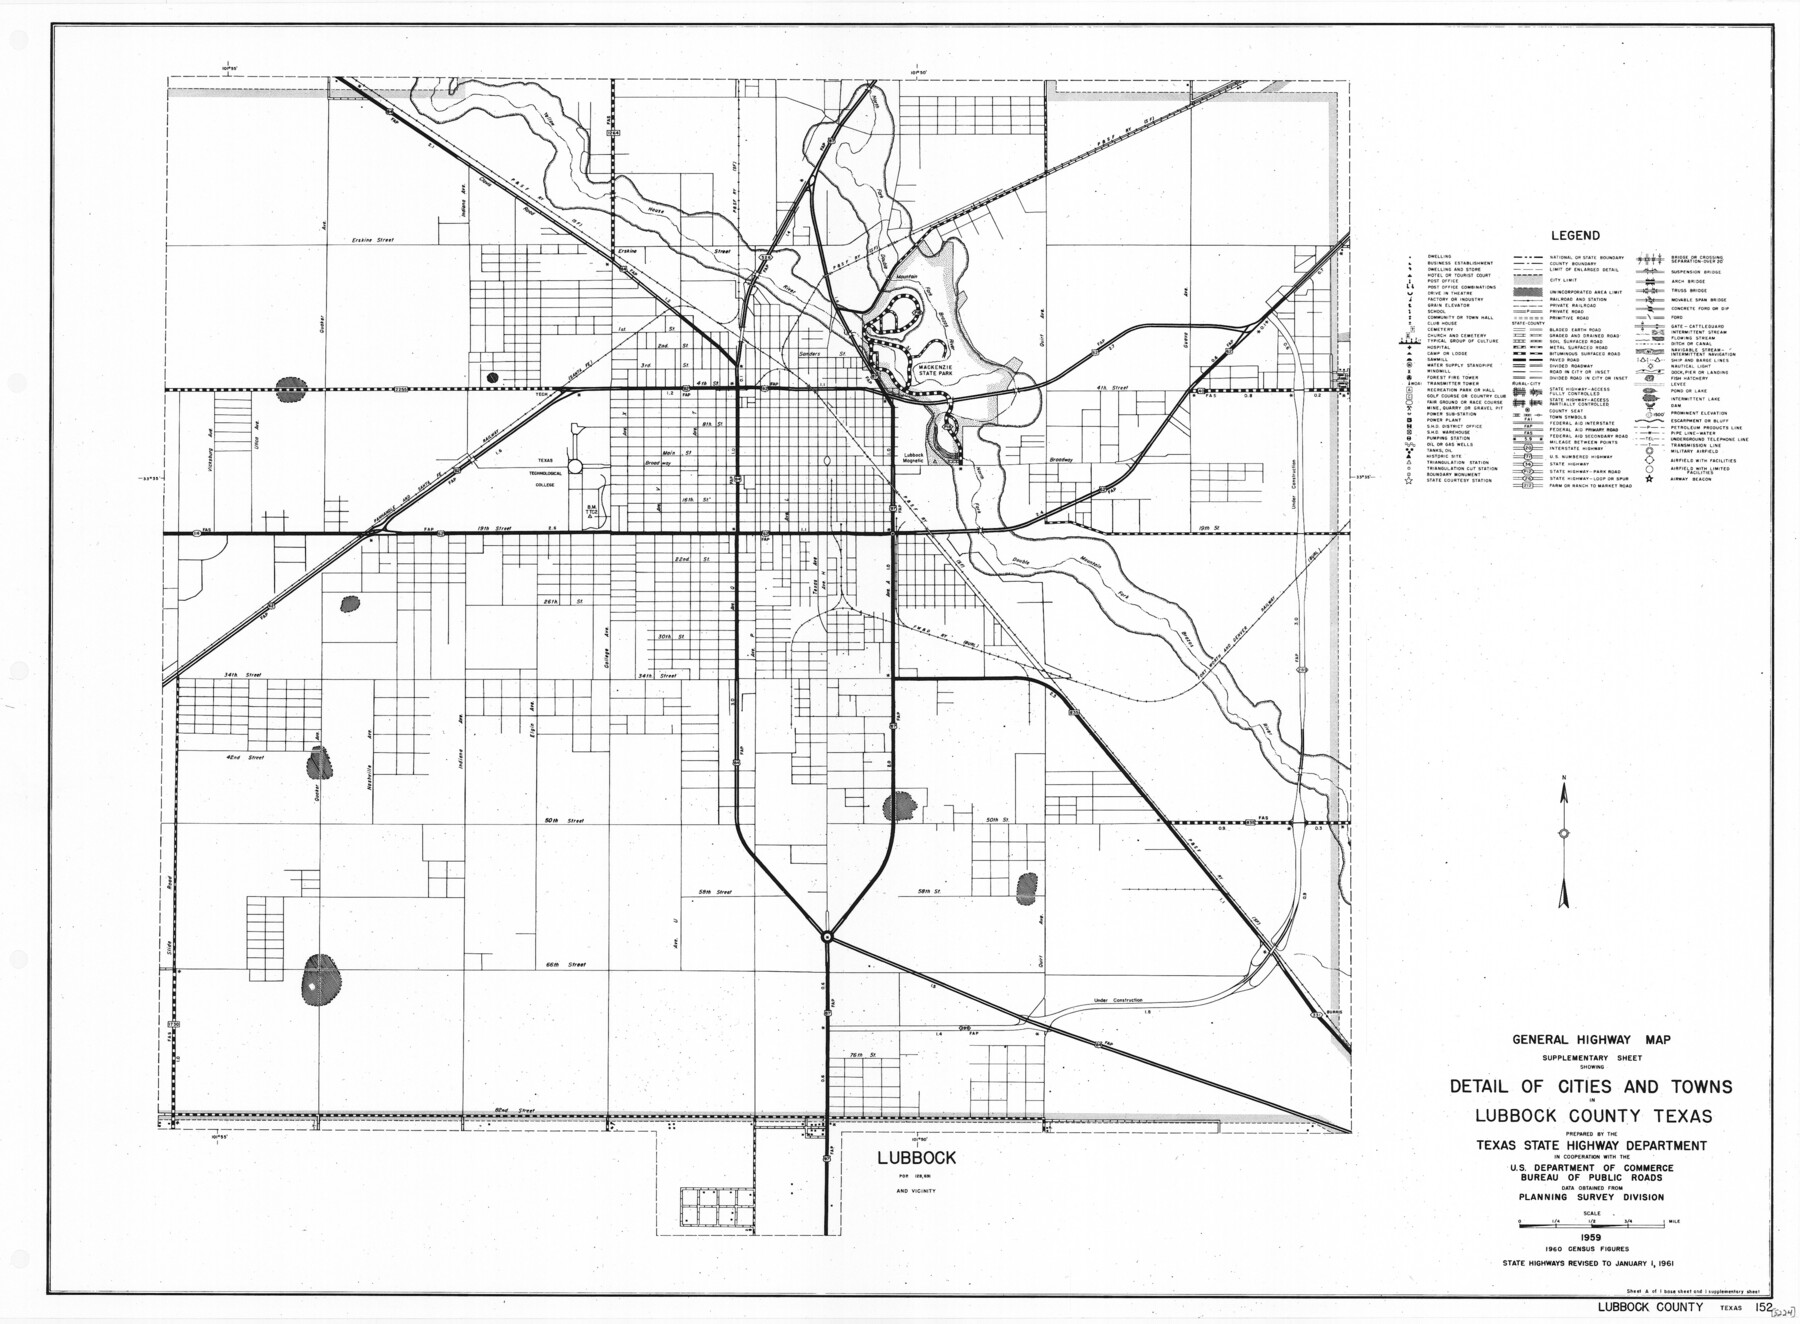 79579, General Highway Map.  Detail of Cities and Towns in Lubbock County, Texas  [Lubbock and vicinity], Texas State Library and Archives